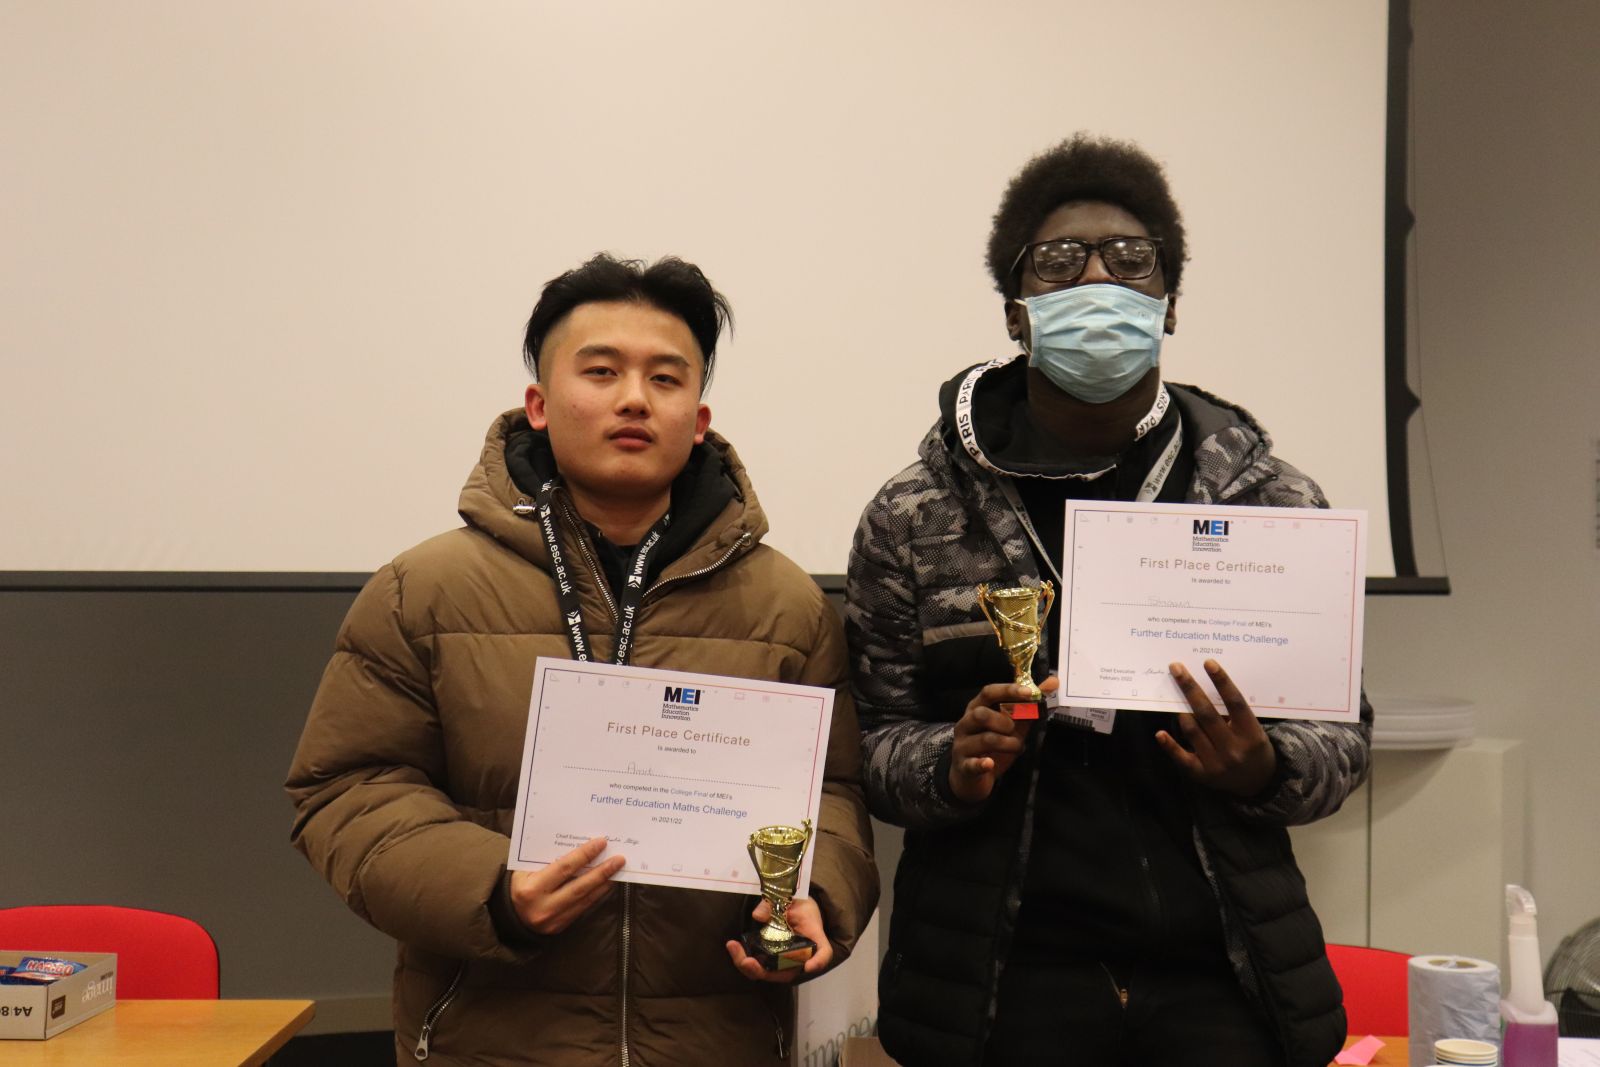 Business students place first at an internal Maths competition at East Surrey College